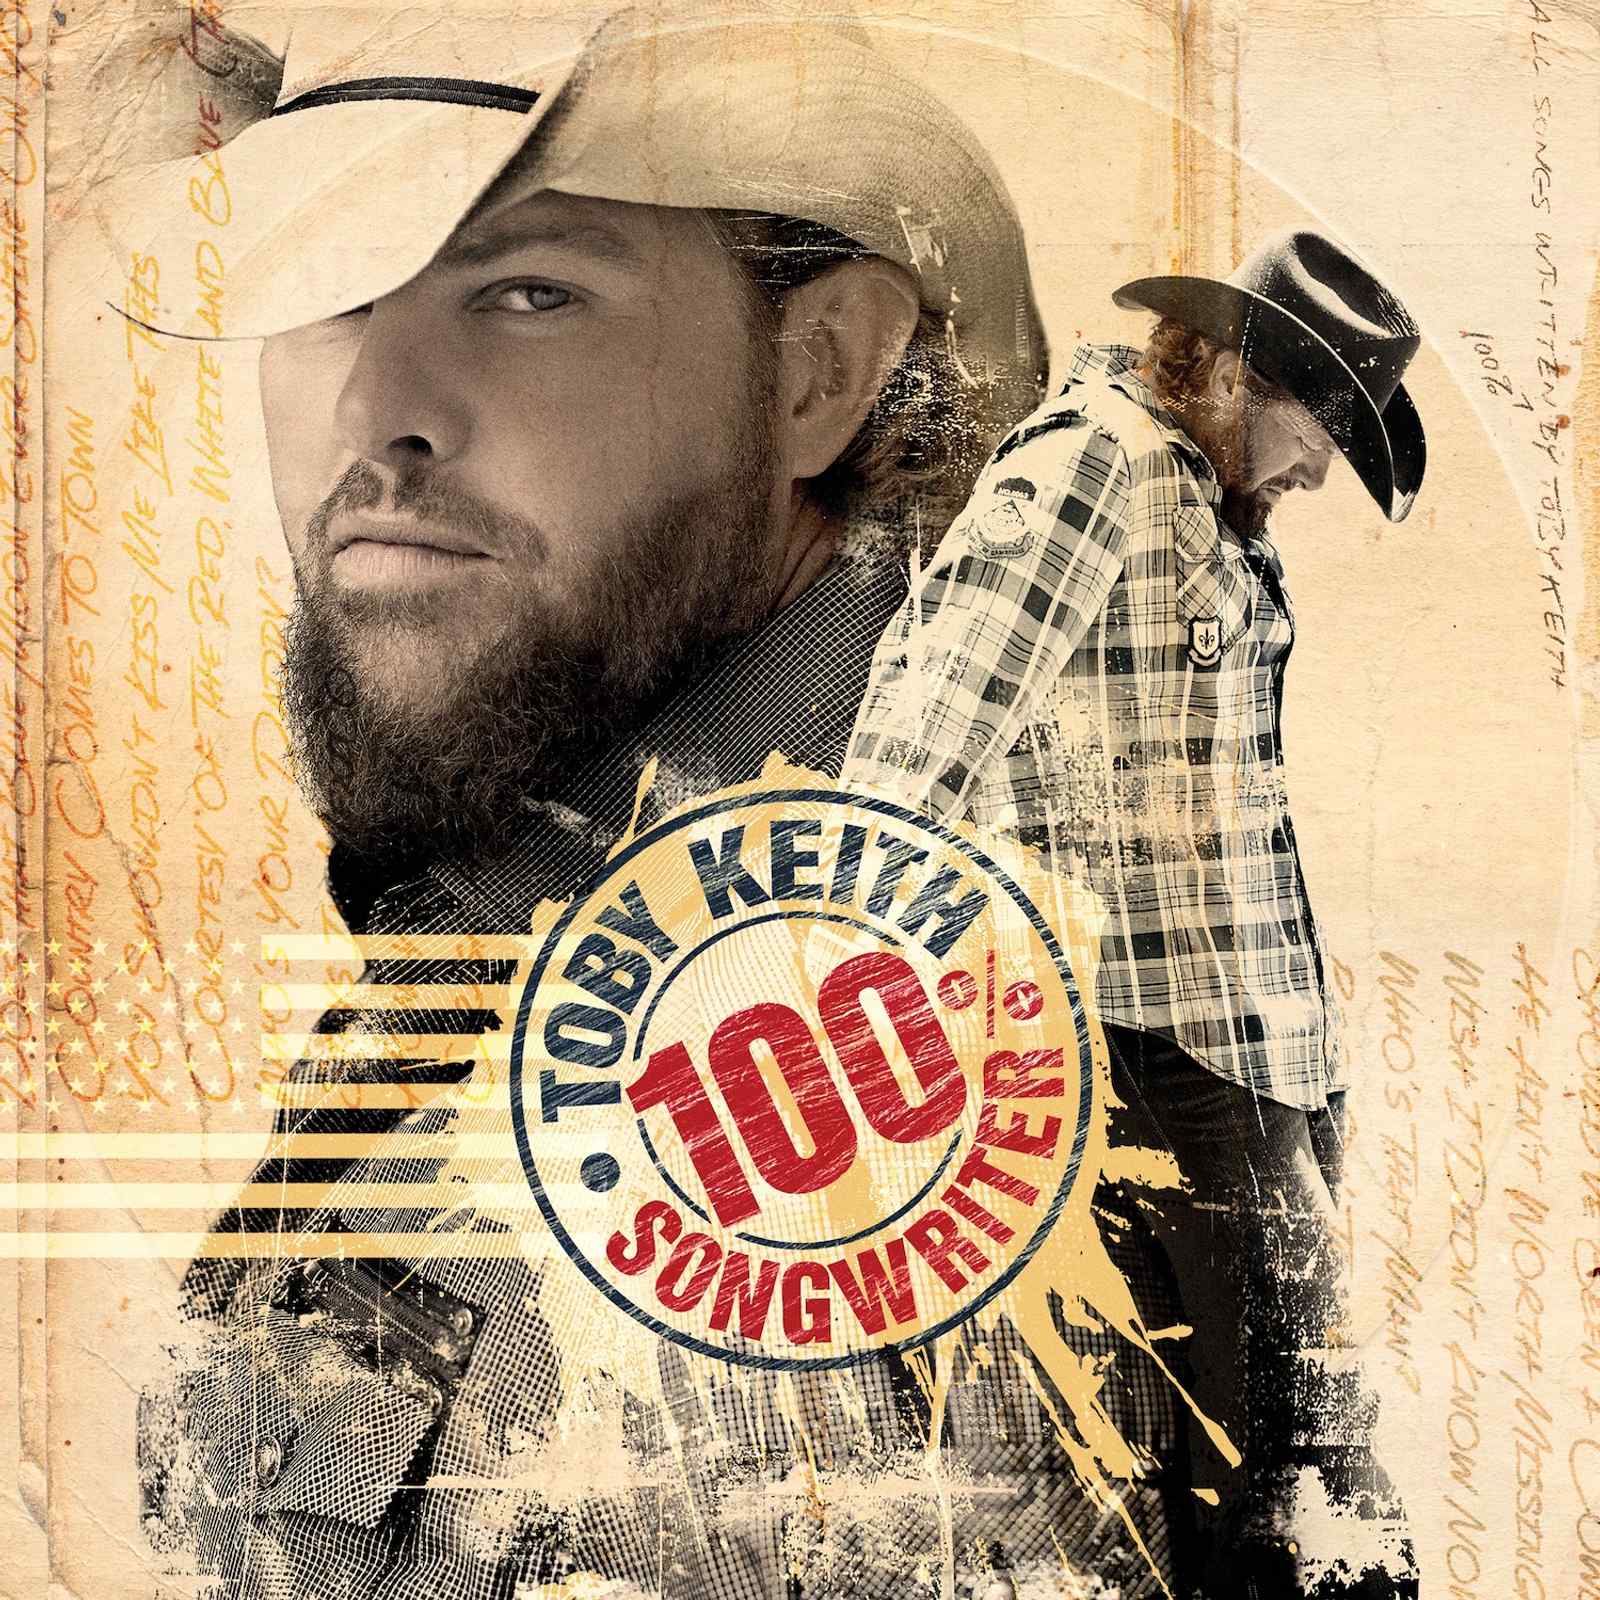 Toby Keith Album  100% Songwriter  Out Today  ﻿November 17